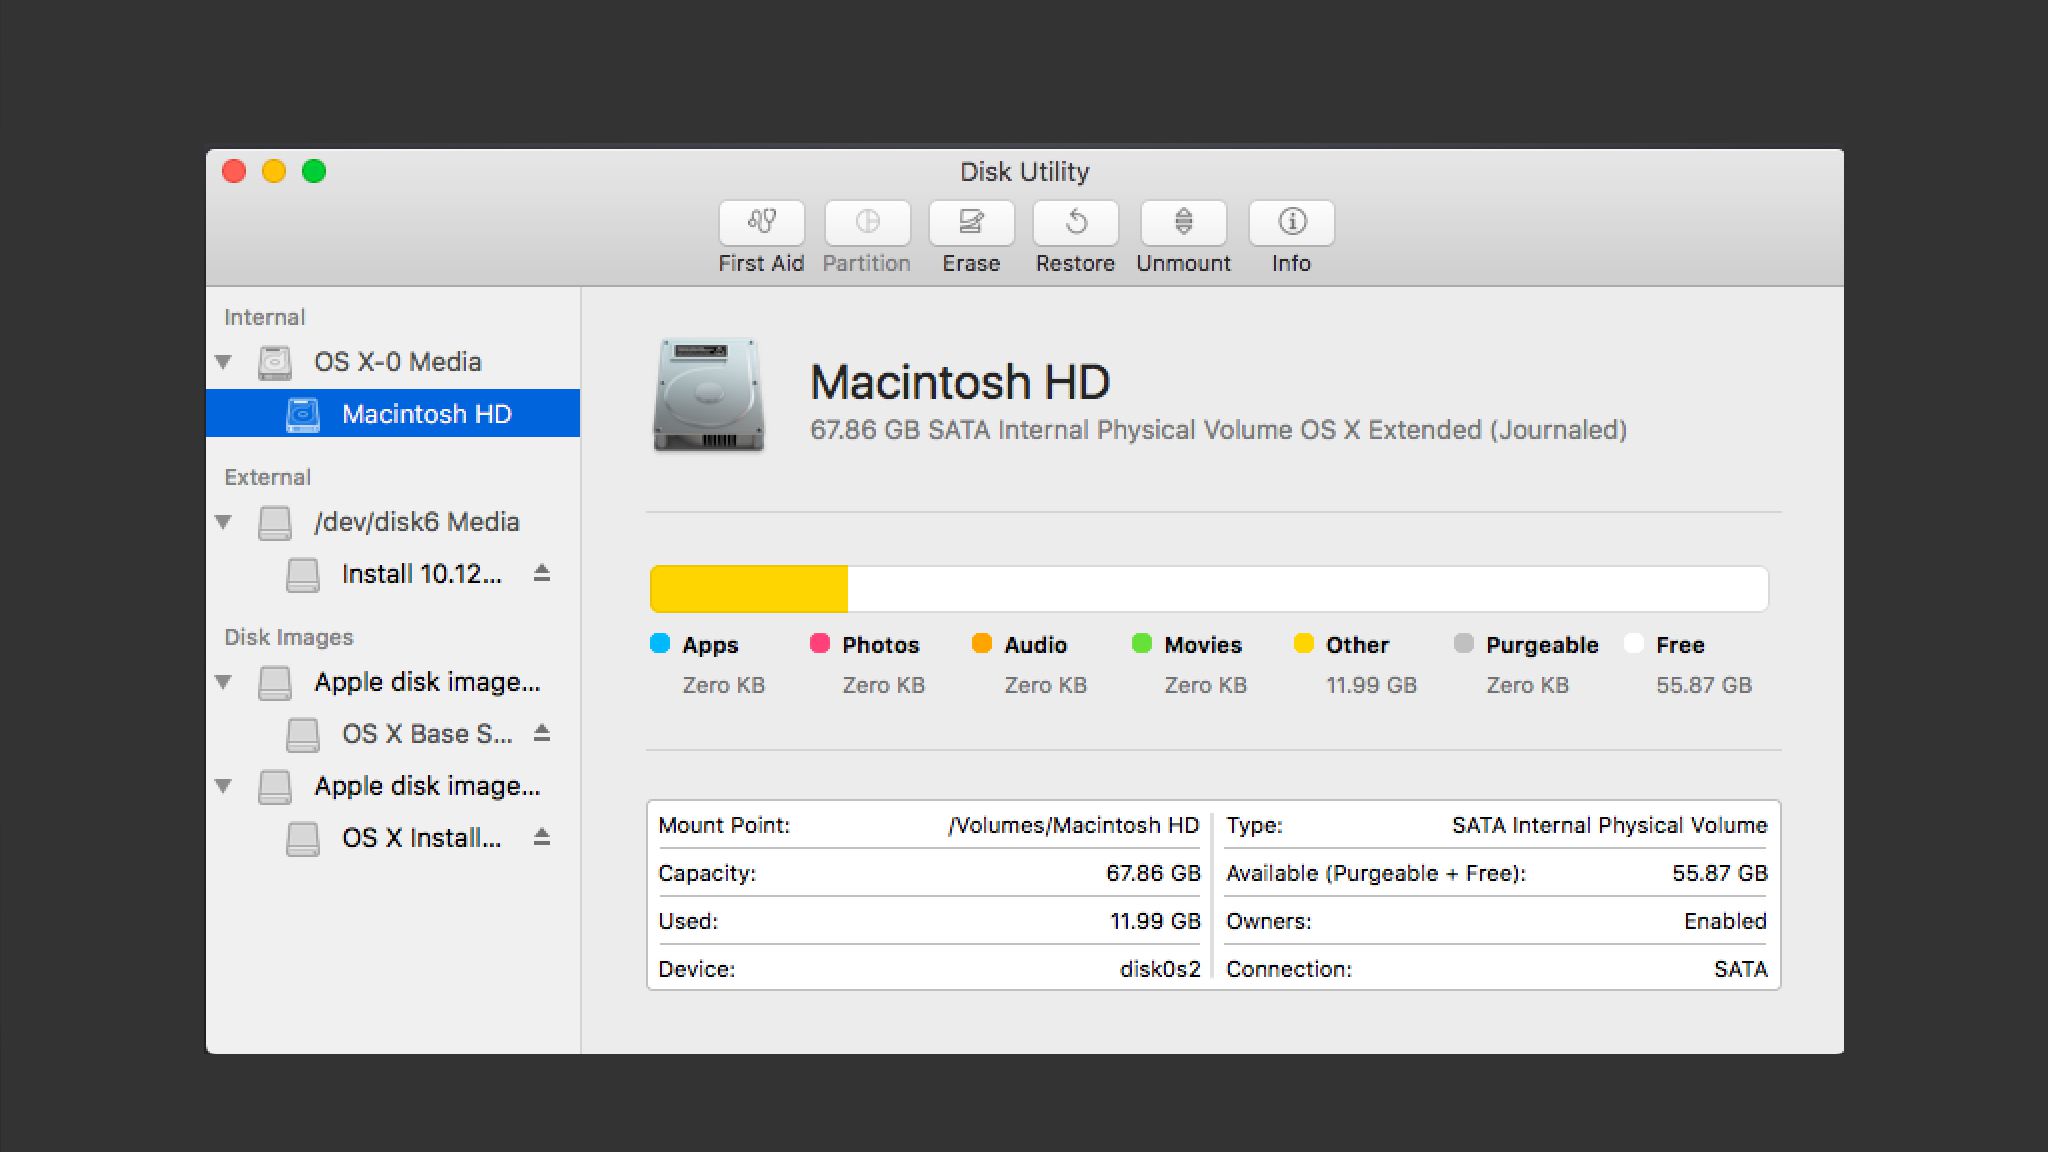 format hard drive on disk utility for compatibility with pc and mac